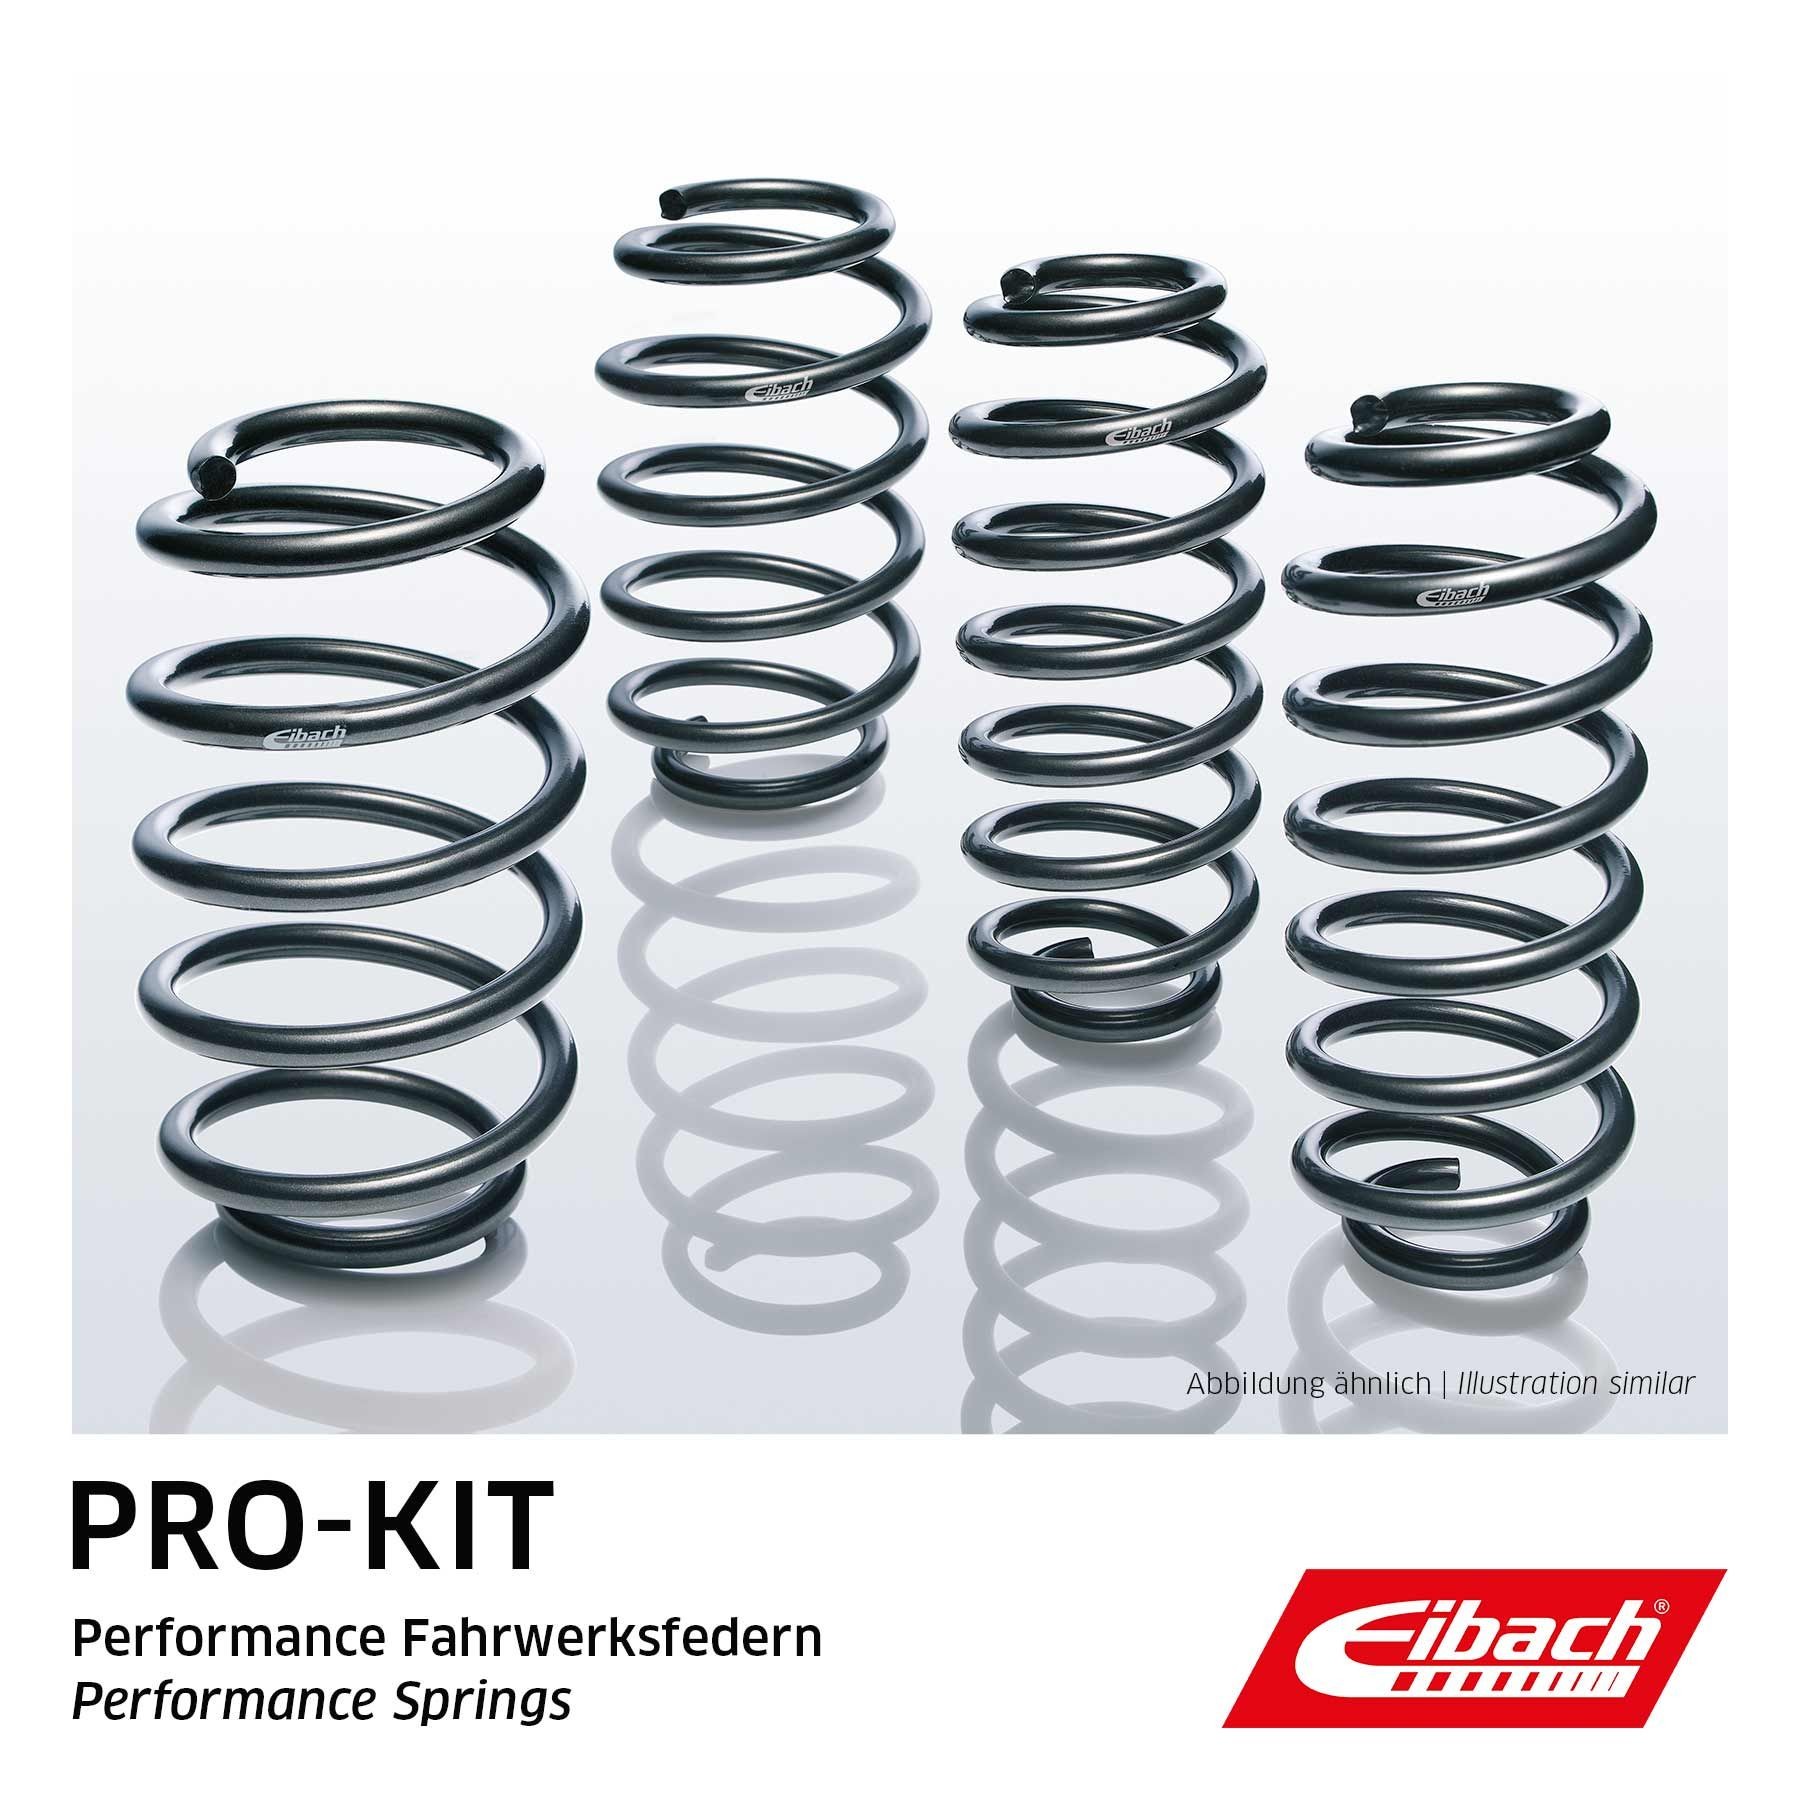 Suspension kit, coil springs 10300120222 EIBACH E10-30-012-02-22 - Shock absorption spare parts for Fiat order